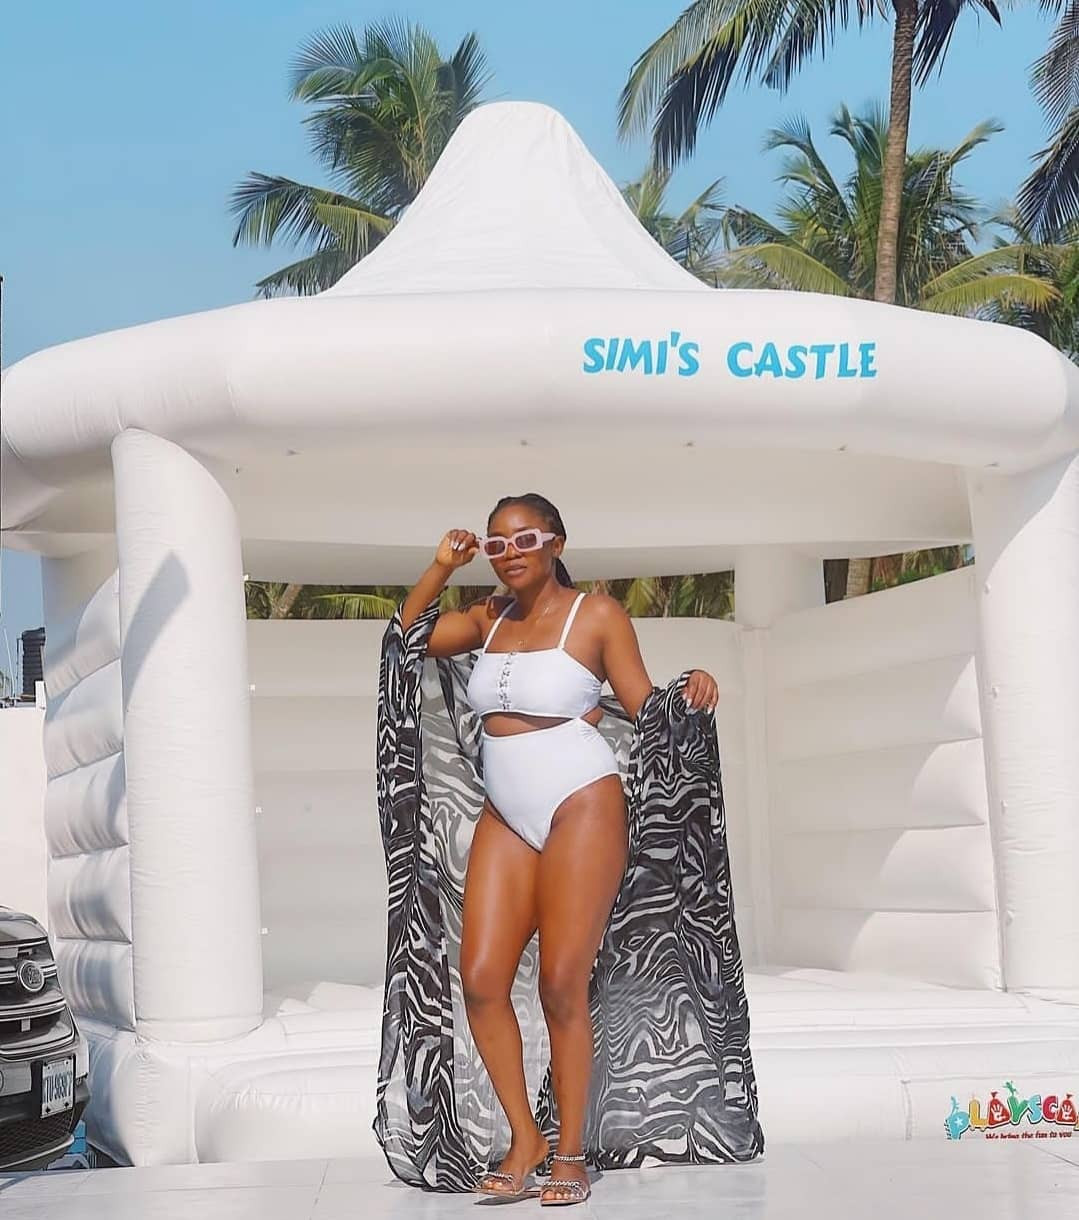 Singer, Simi shares photos and videos from her pool party. 49